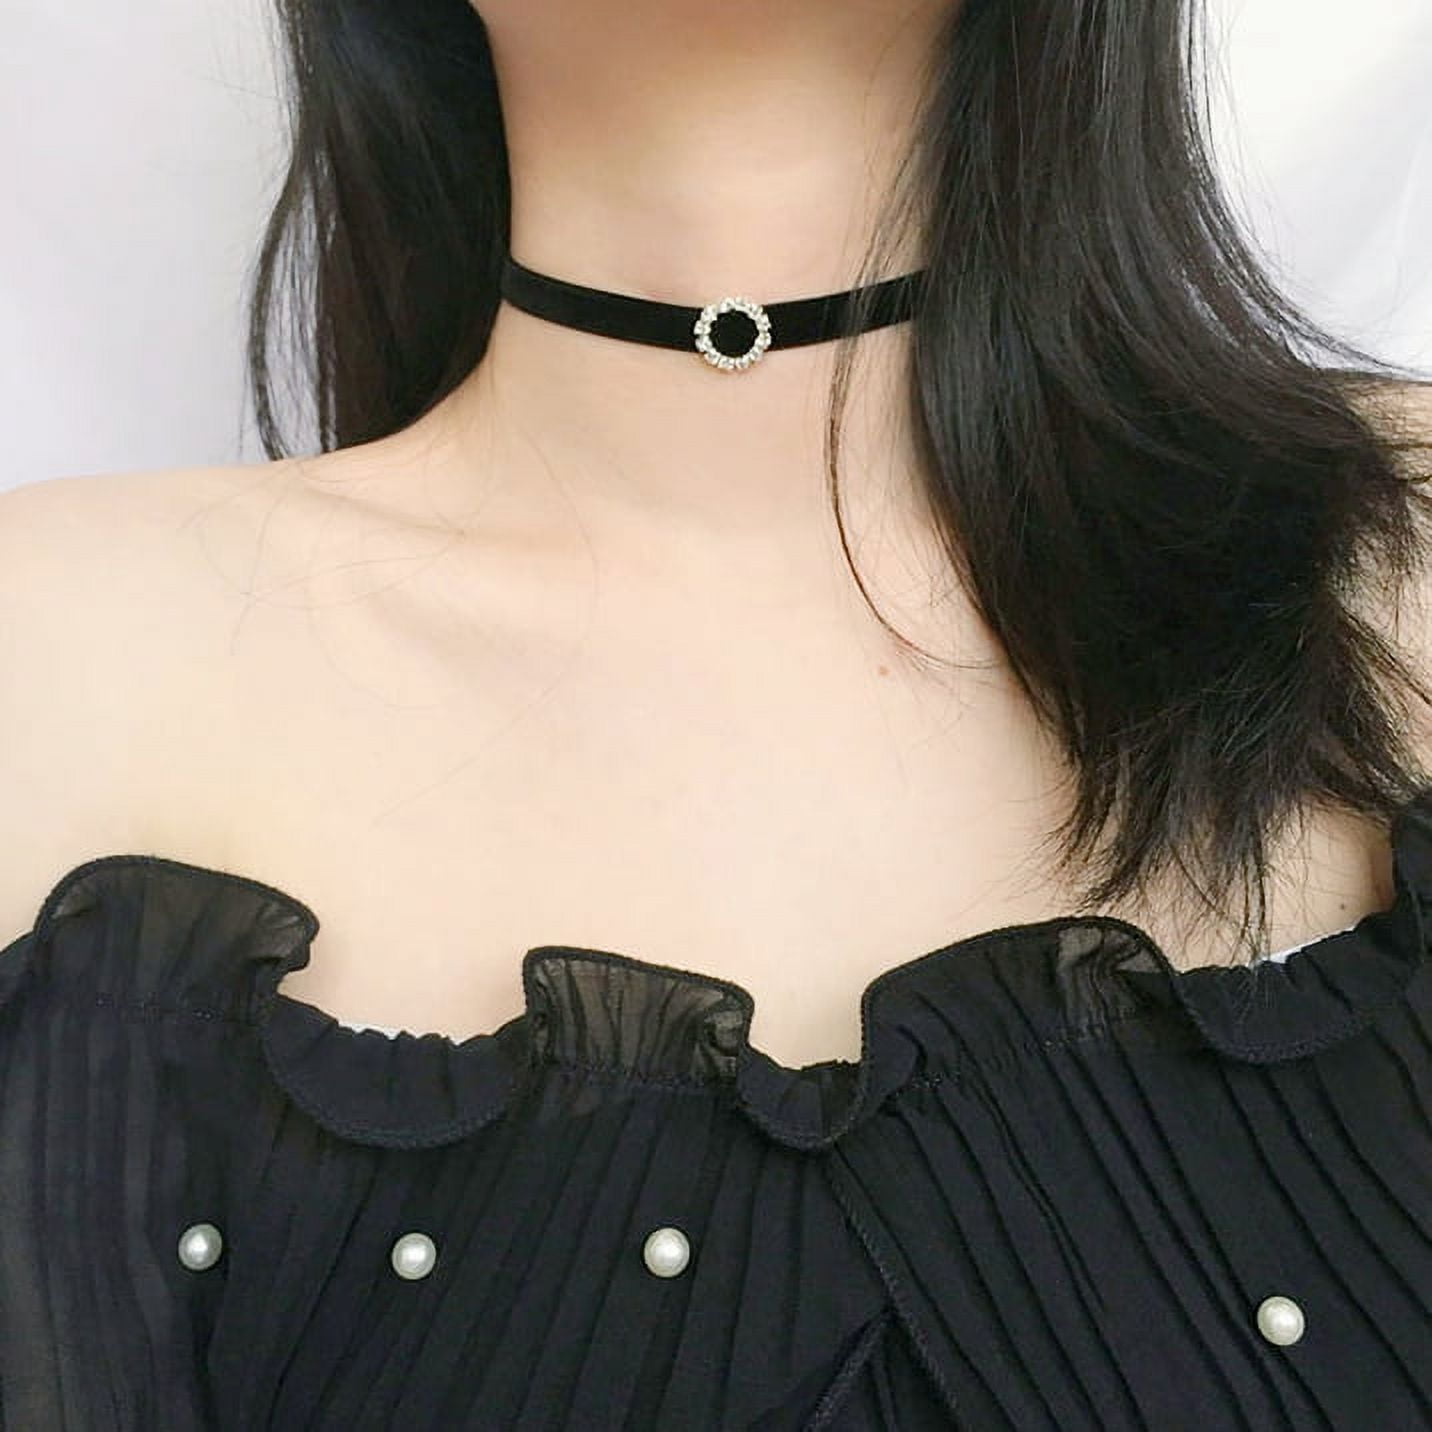 Gothic Black Stretch Wire Elastic Double Line Henna Bracelet Tattoo Choker  Necklace For Women Express Shipping From Legou668, $0.16